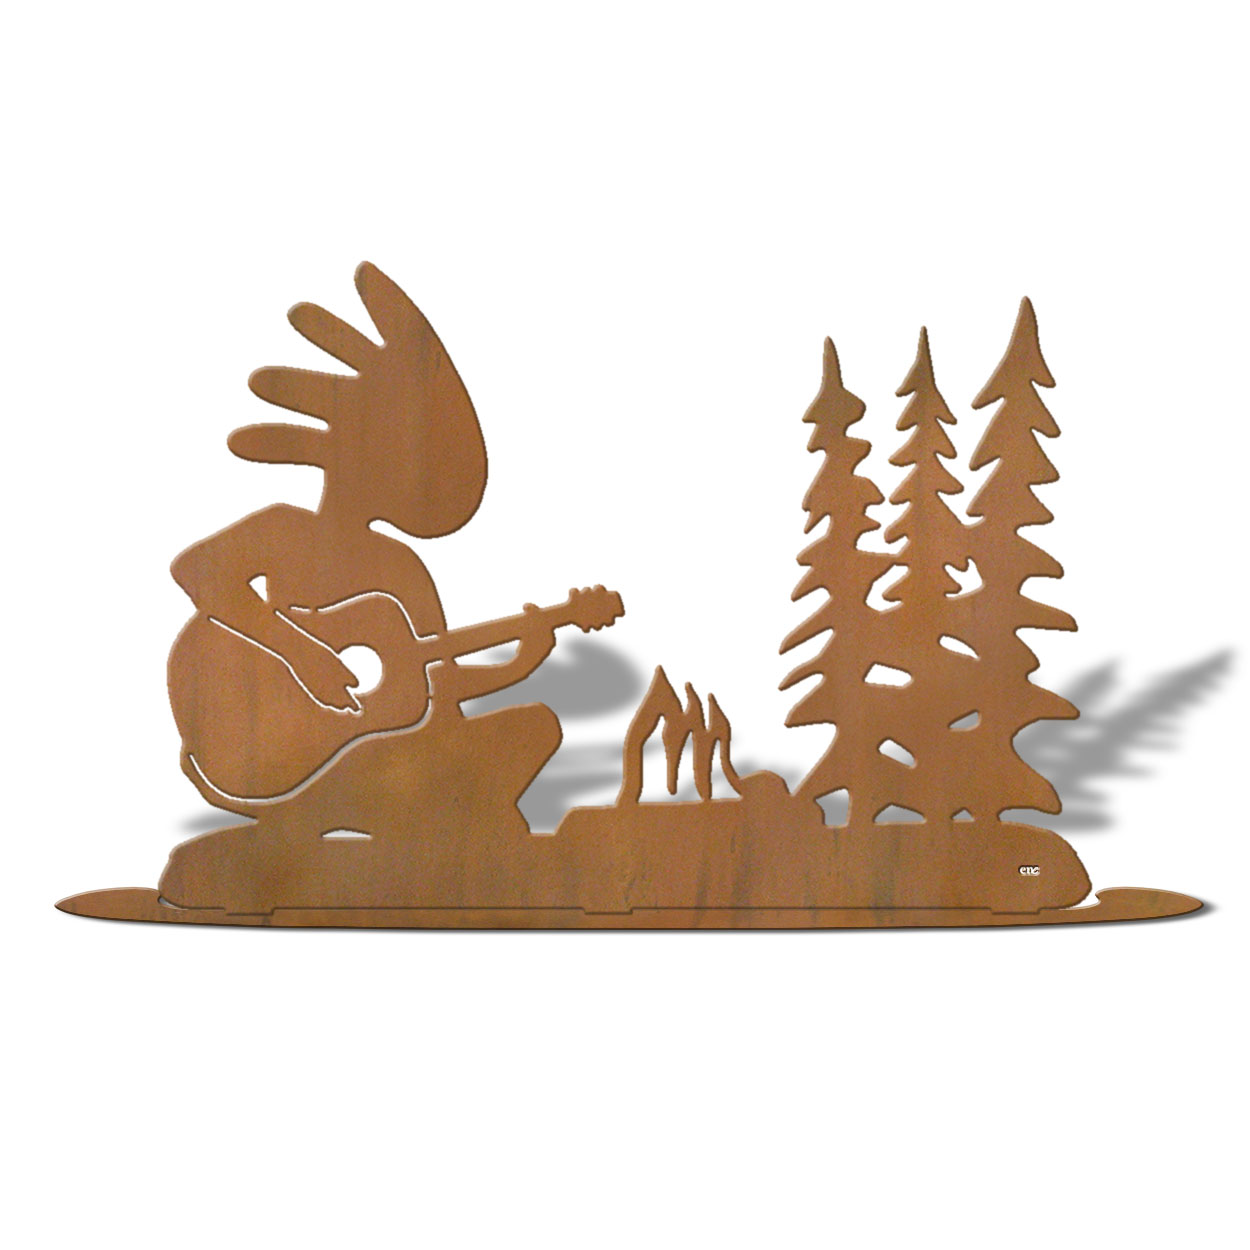 623022r - Tabletop Art - 20in x 14in - Trees Camper - Rust Patina